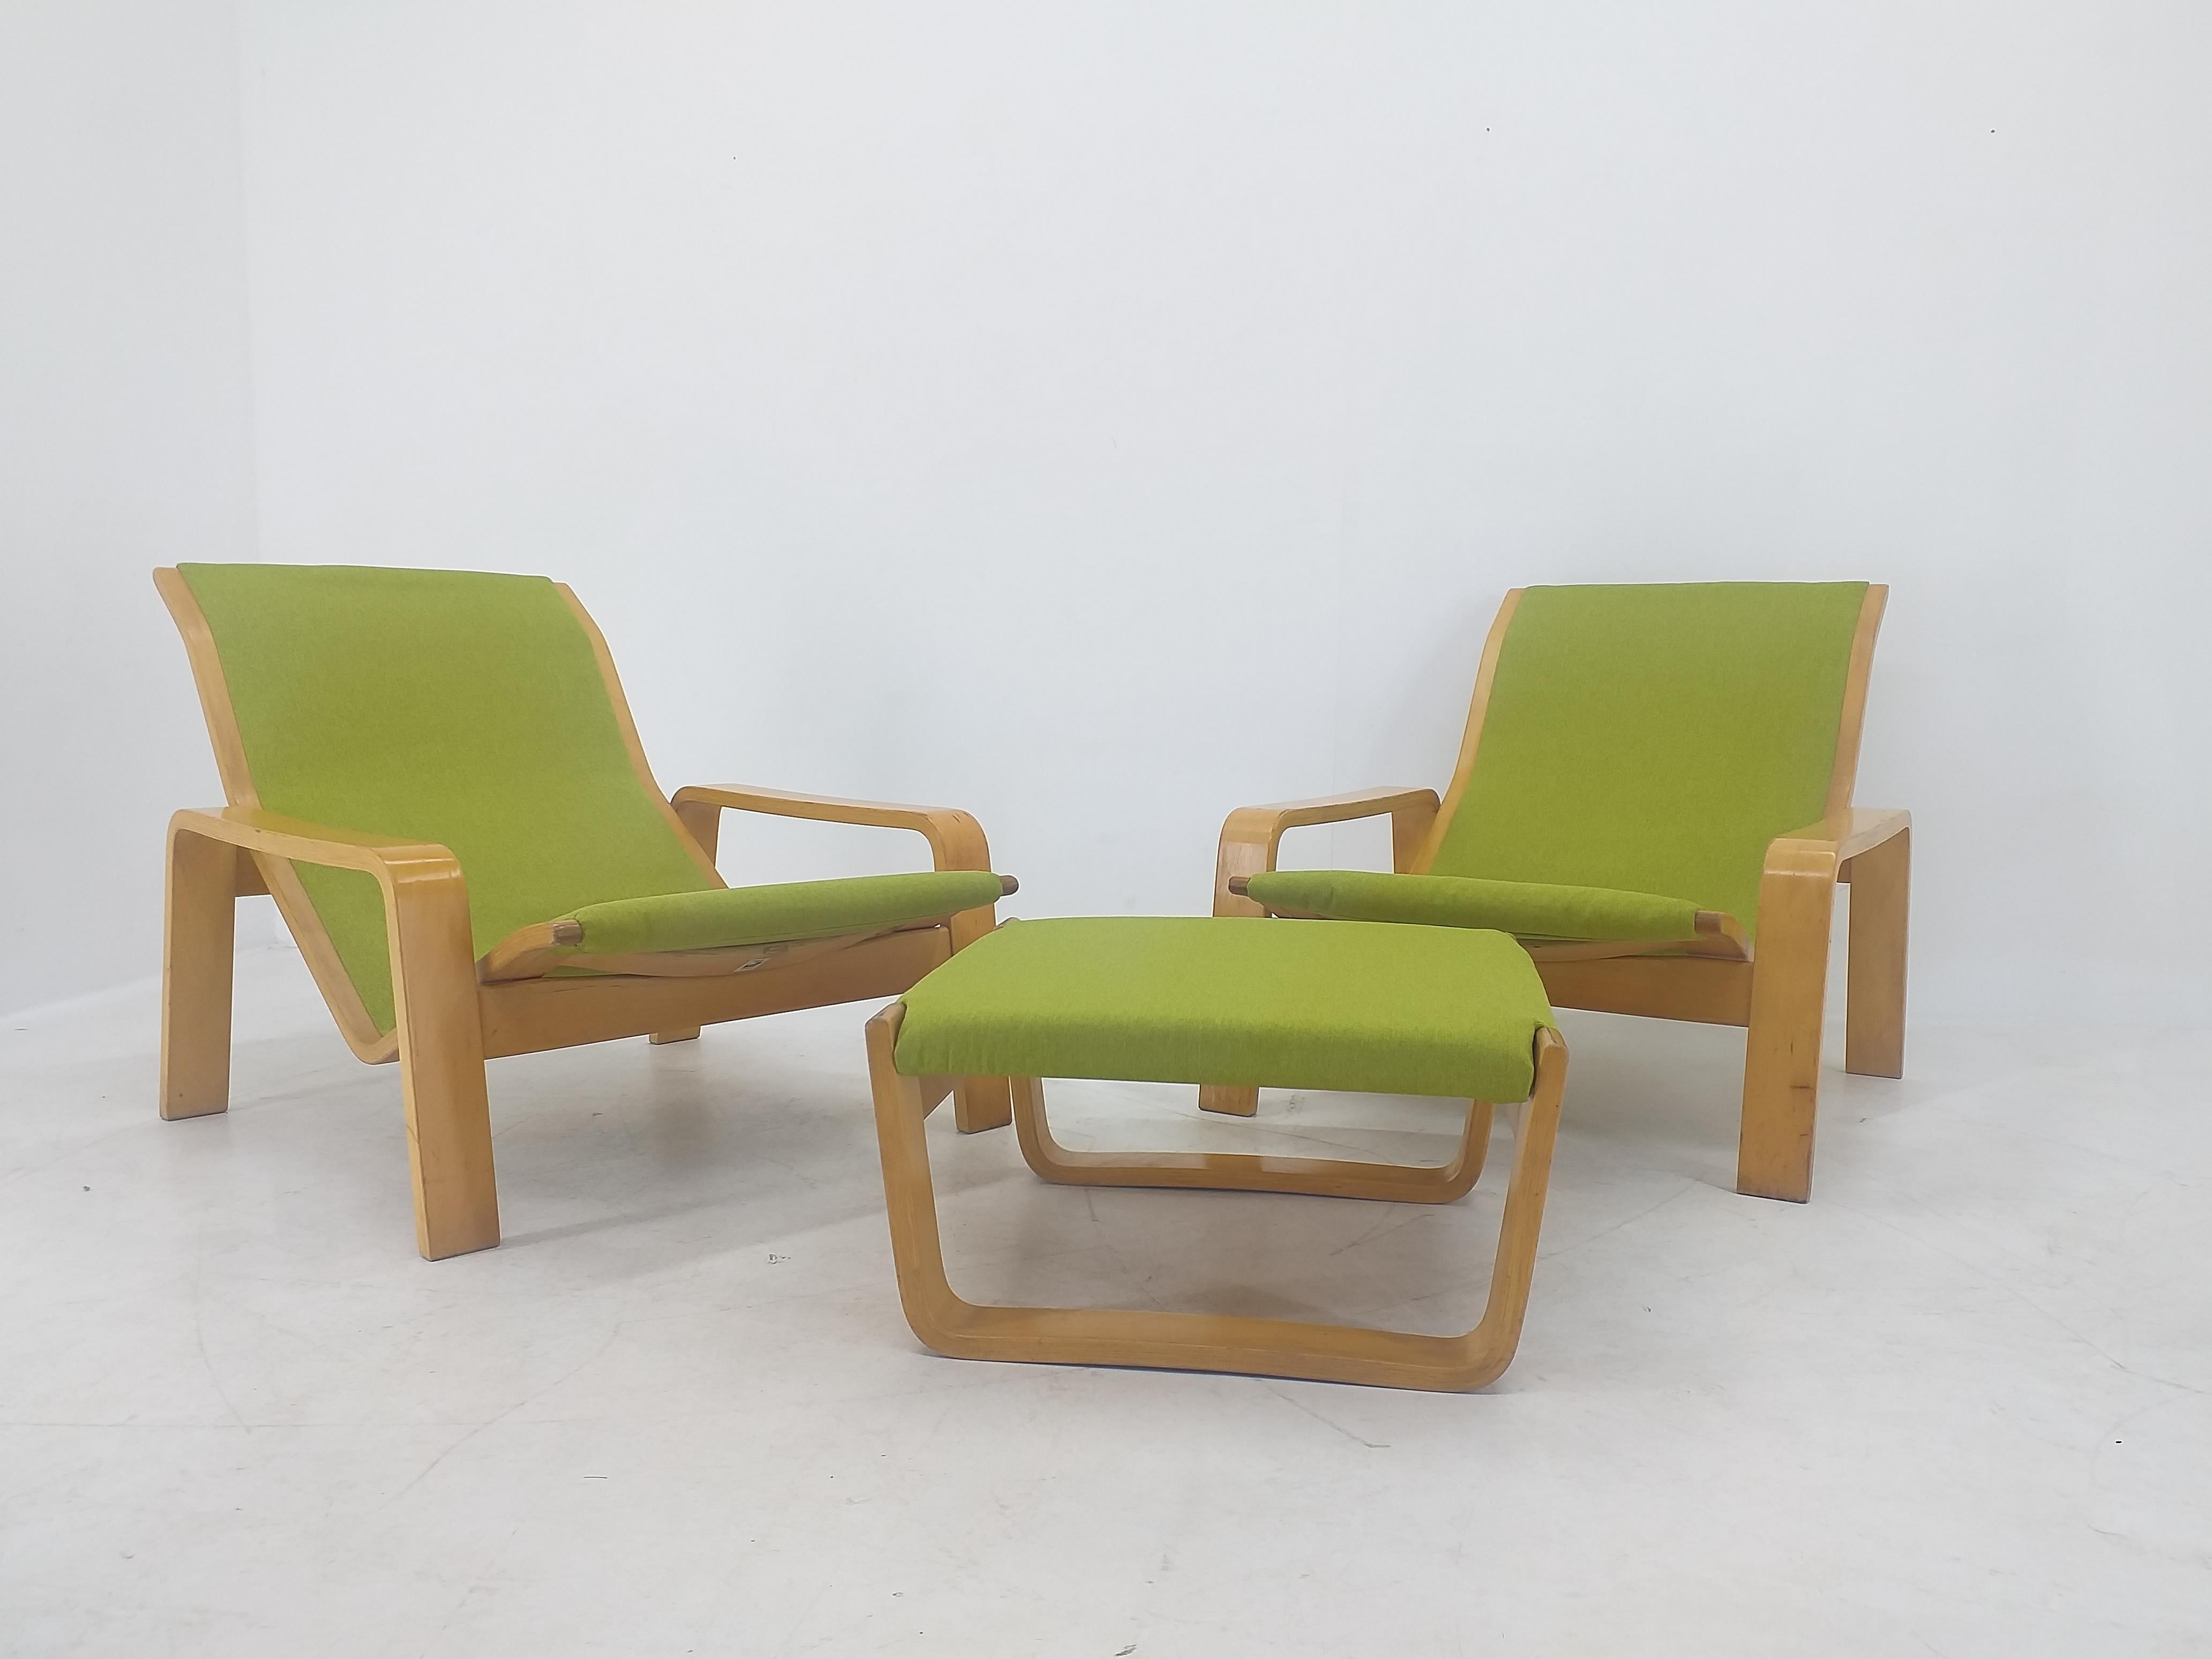 Fabric Pair of Lounge Chairs Pulkka, Ilmari Lappalainen for ASKO, Finland, 1970s For Sale